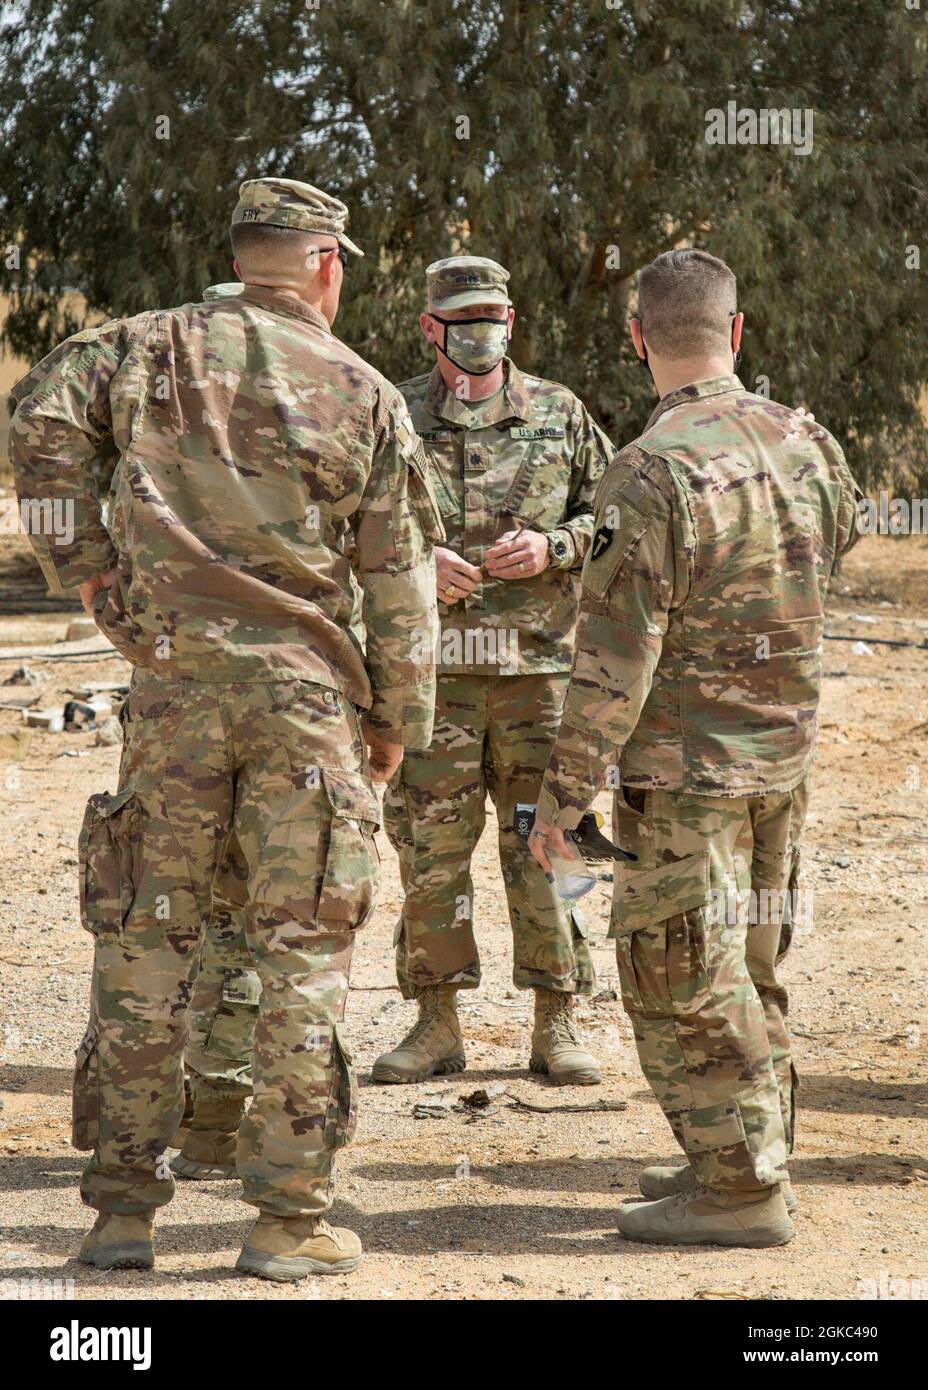 Lt. Col. Christopher Winnek, Task Force Spartan G6, speaks with soldiers during a visit to the King Faisal Air Base in Jordan, Mar. 9, 2021. The soldiers were taking a tour of the air base for future planning purposes. Stock Photo